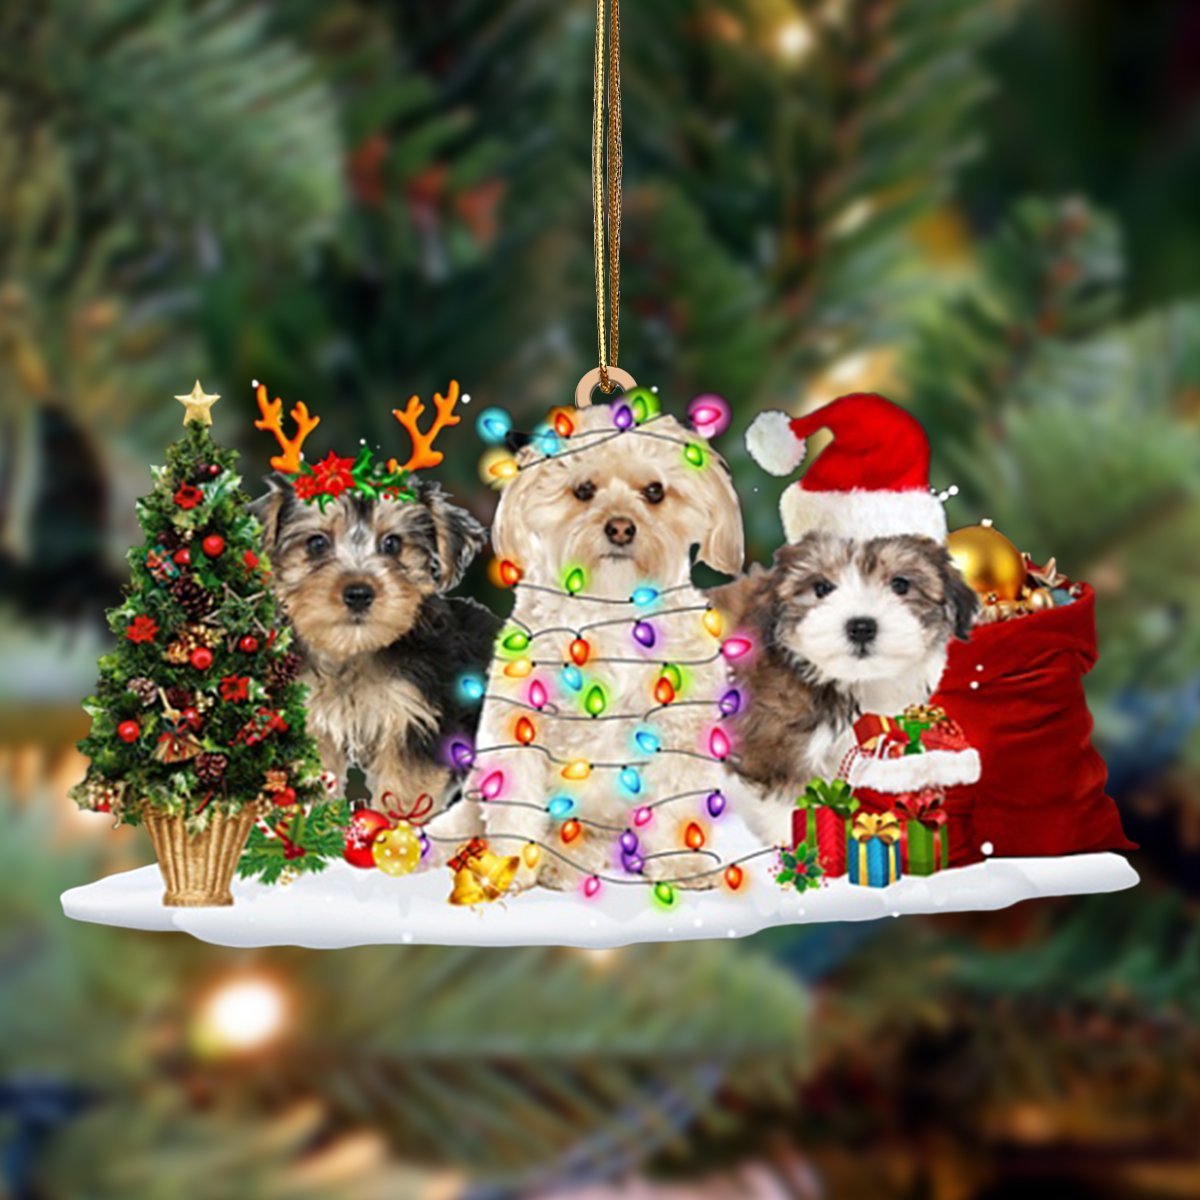 Morkie-Christmas Dog Friends Hanging Ornament